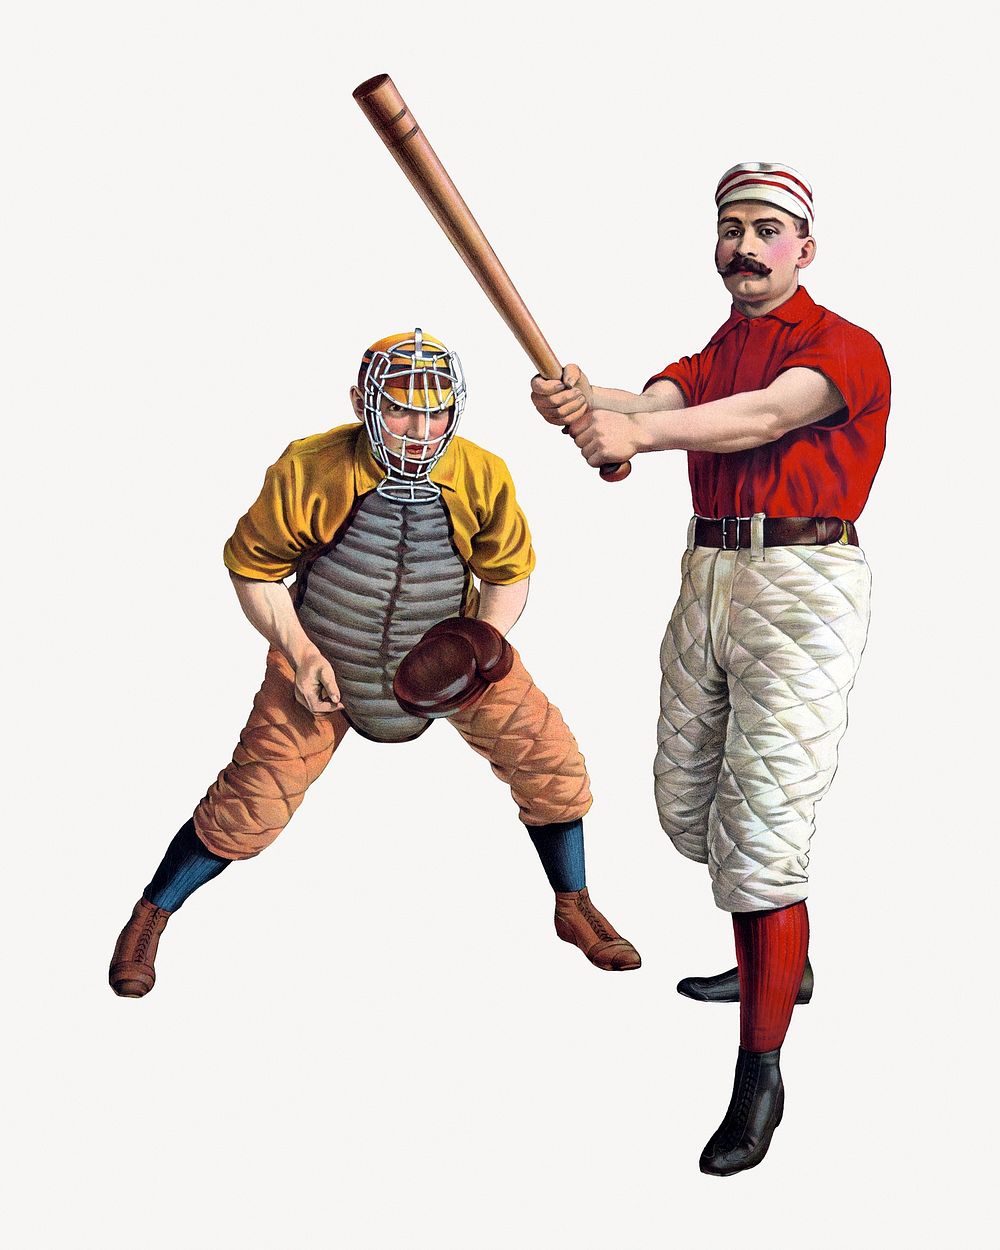 Vintage baseball players, sports illustration.   Remastered by rawpixel